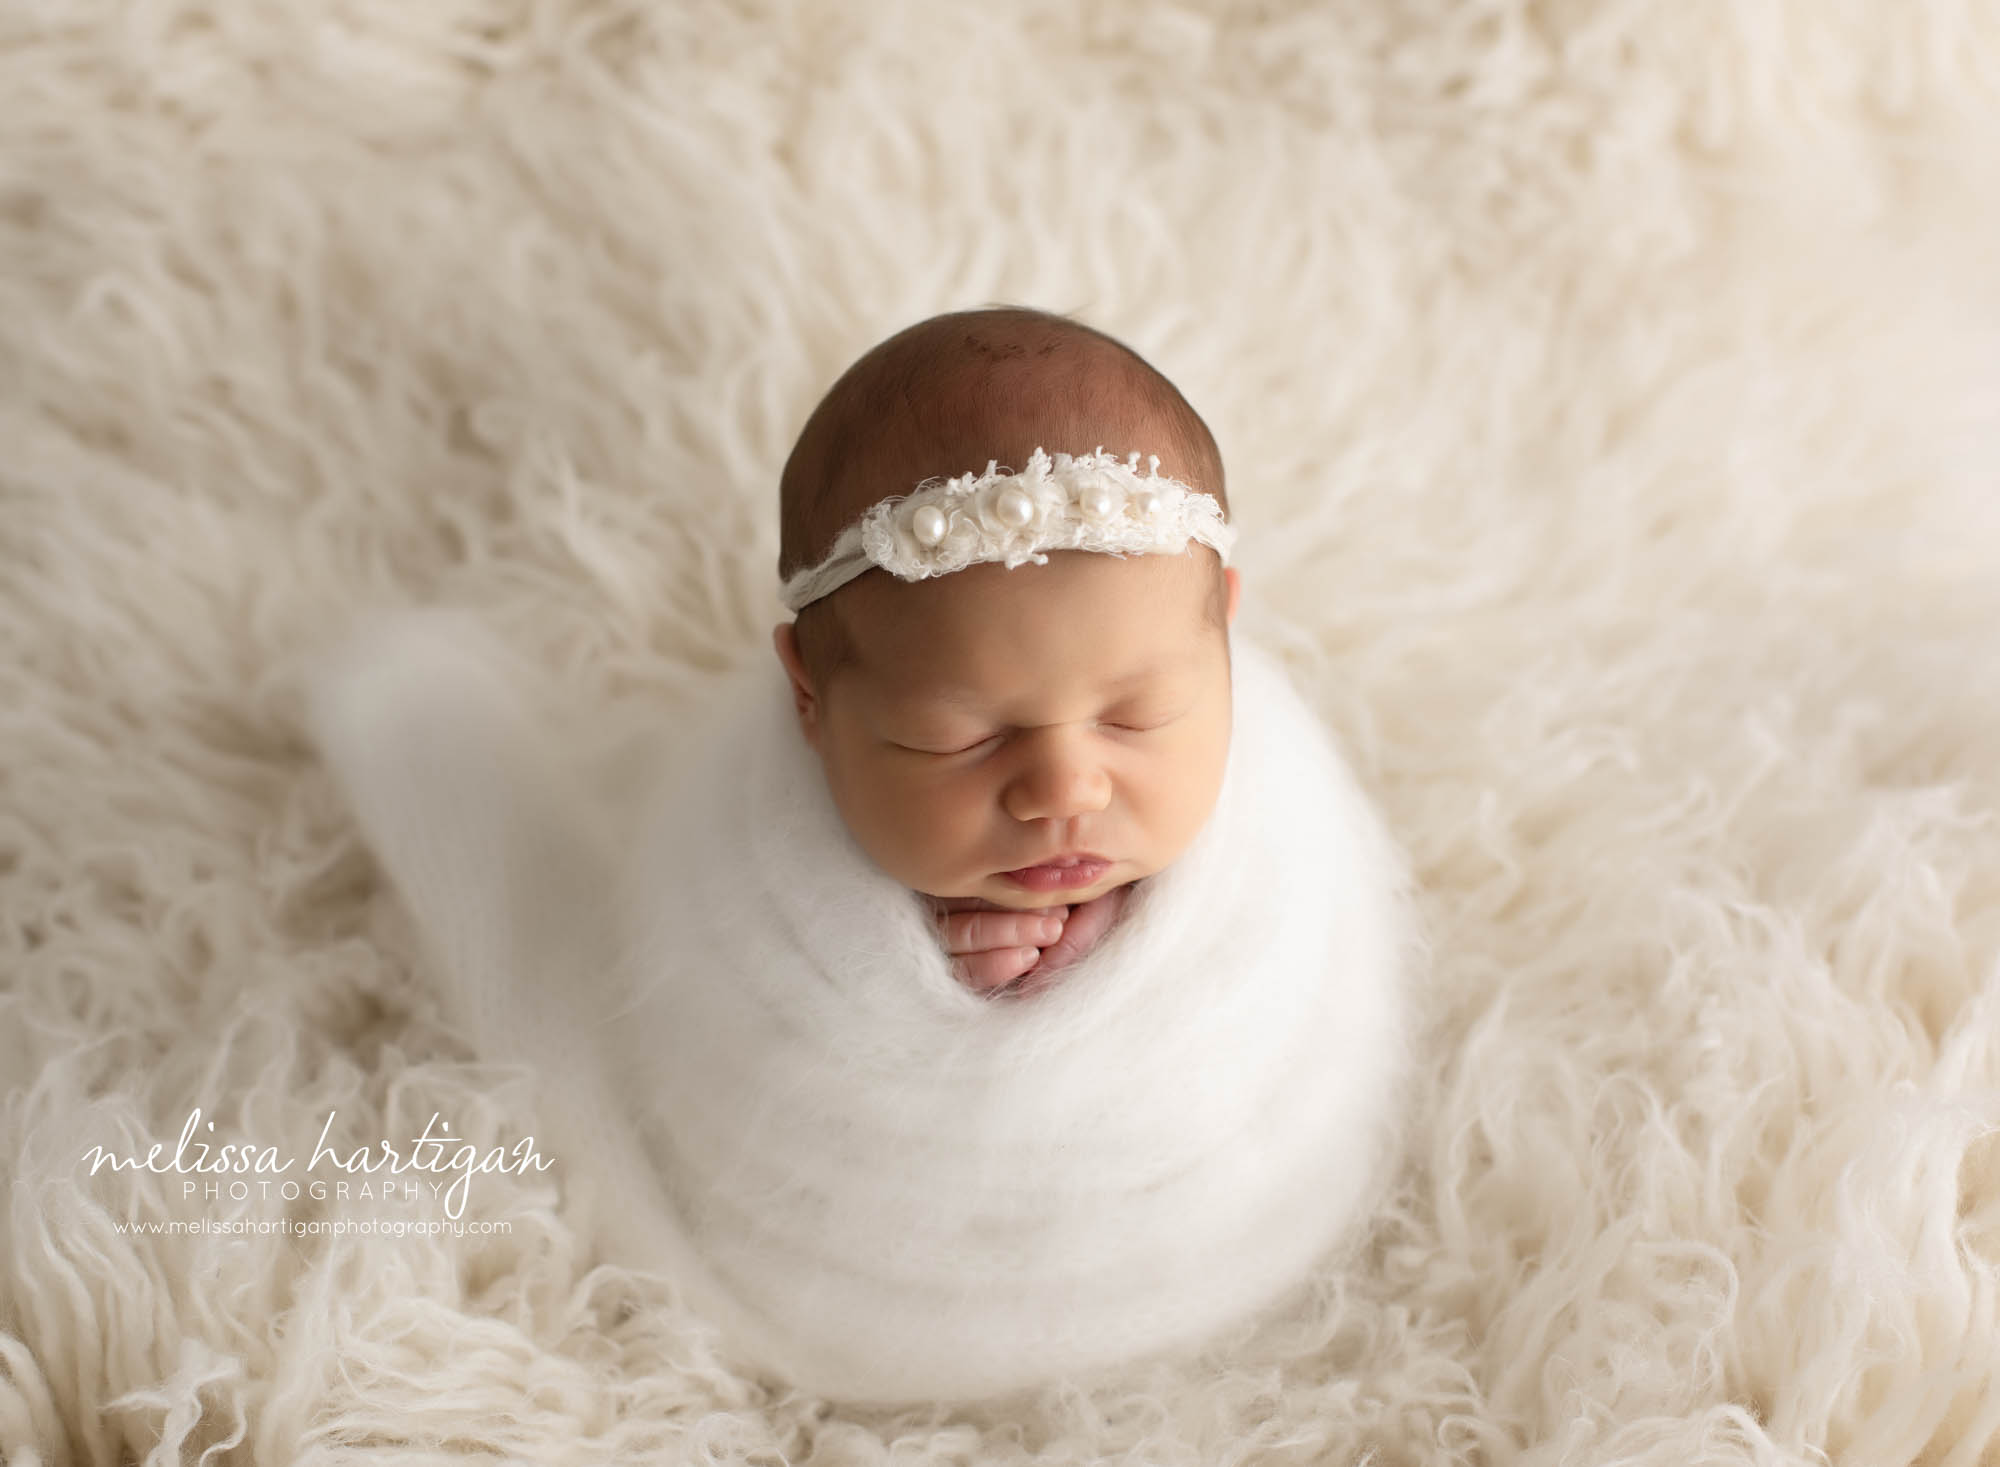 baby girl wrapped in knitted wrap with cream colored headband with pearls posed on flokati rug newborn photography session